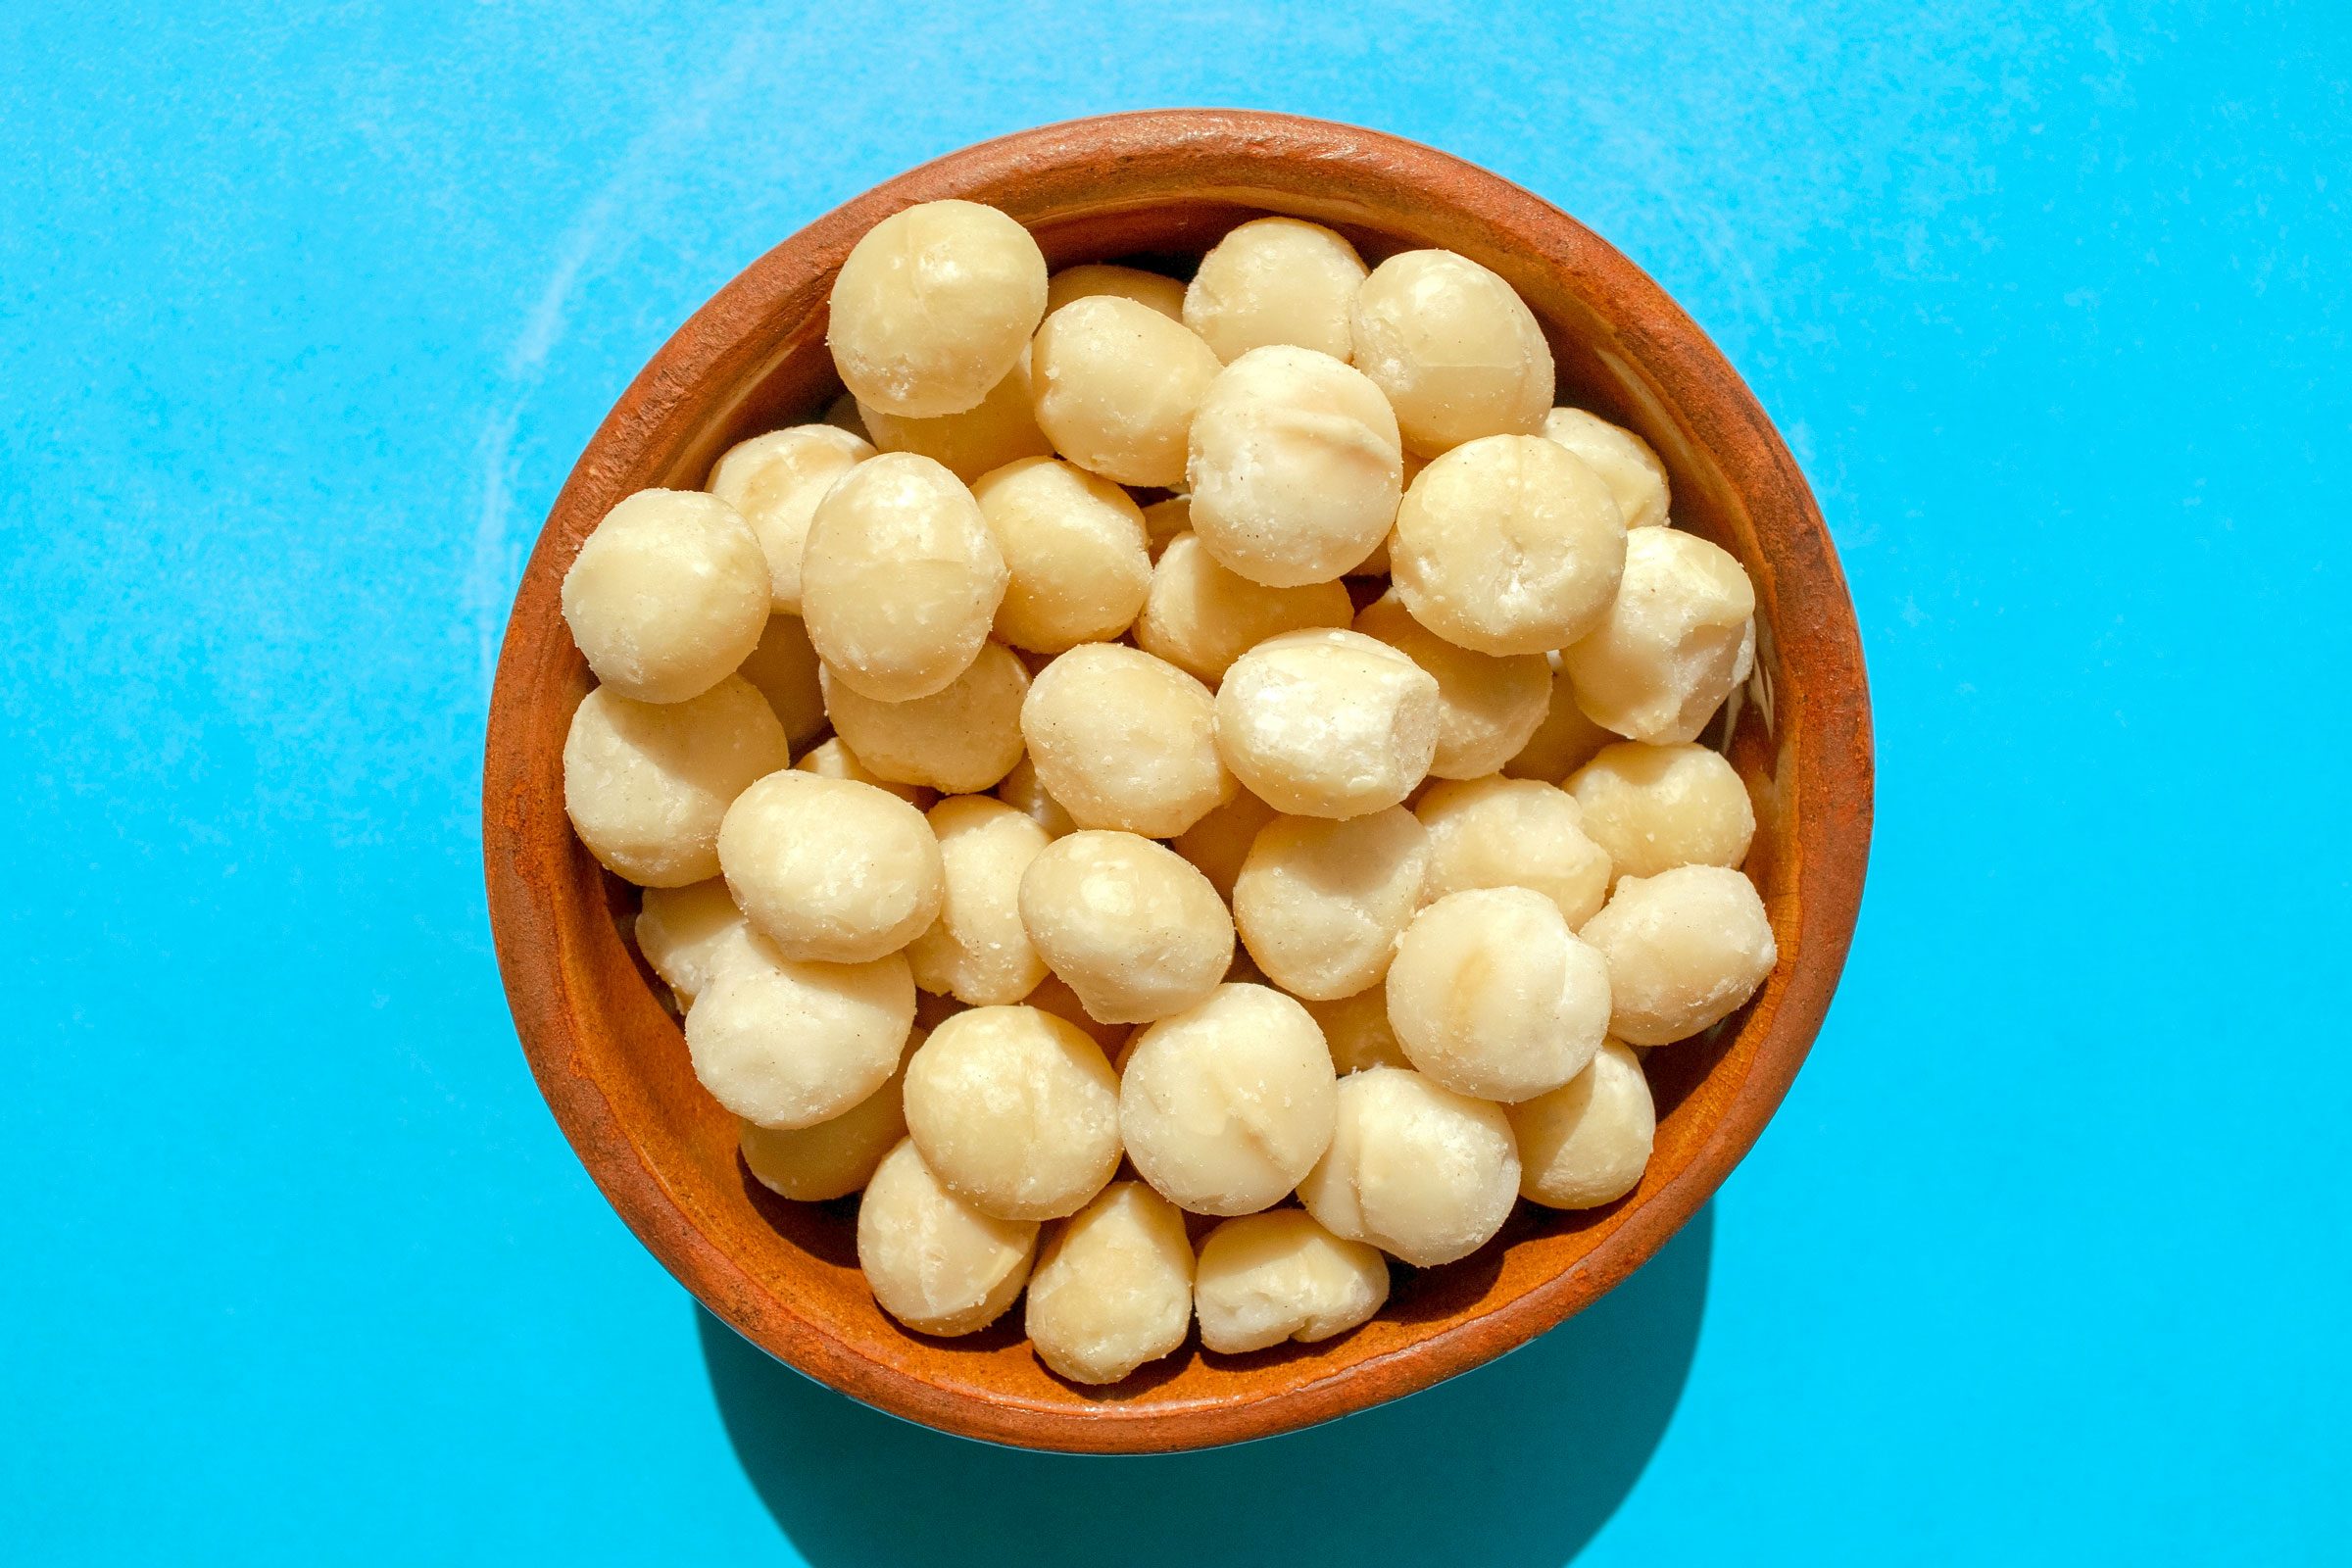 https://www.rd.com/wp-content/uploads/2018/09/GettyImages-1300616586-Macadamia-nuts.jpg?fit=700%2C467